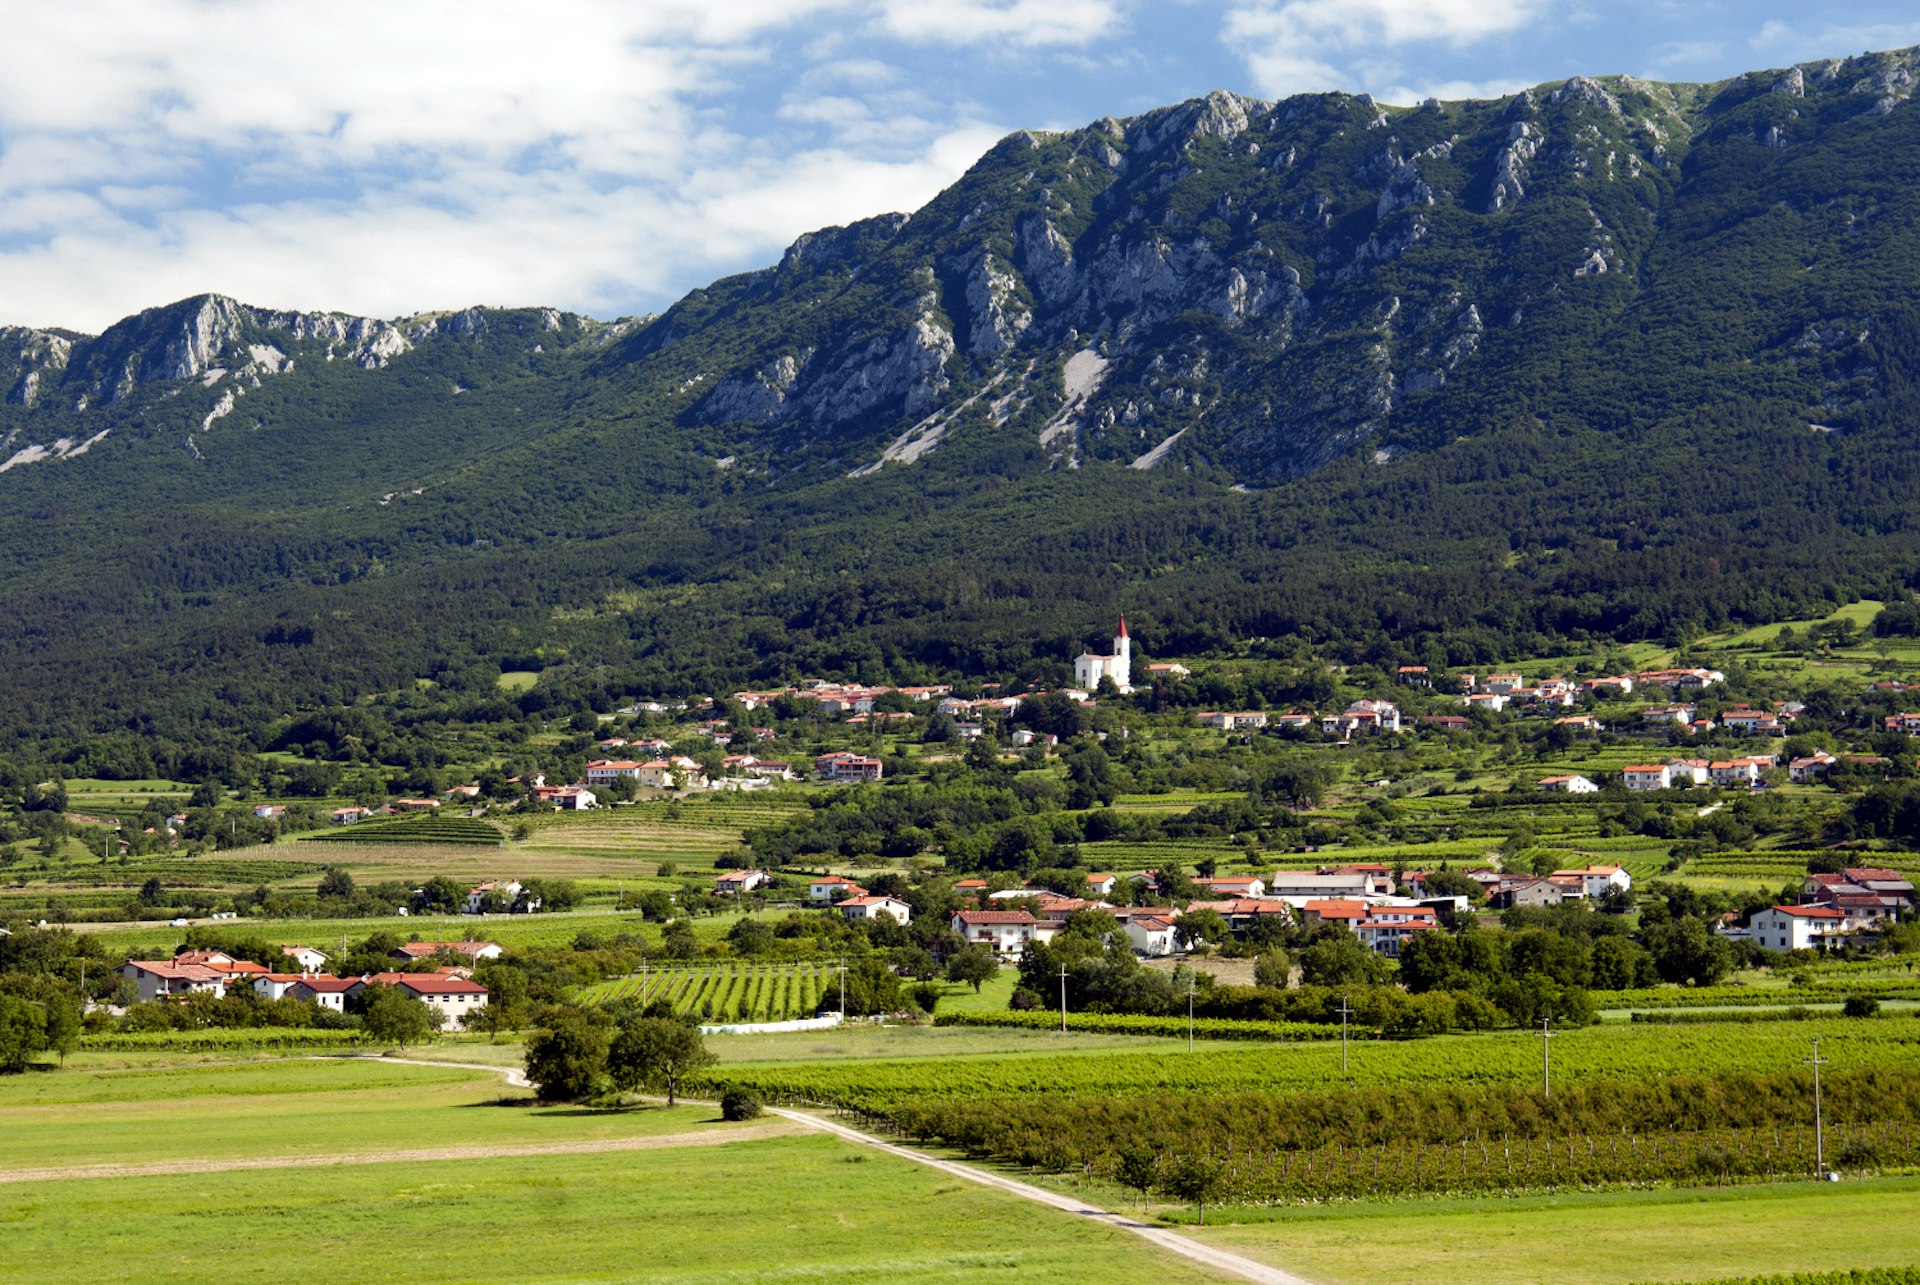 A small town with green vineyards all around is loomed over by a large craggy mountainside